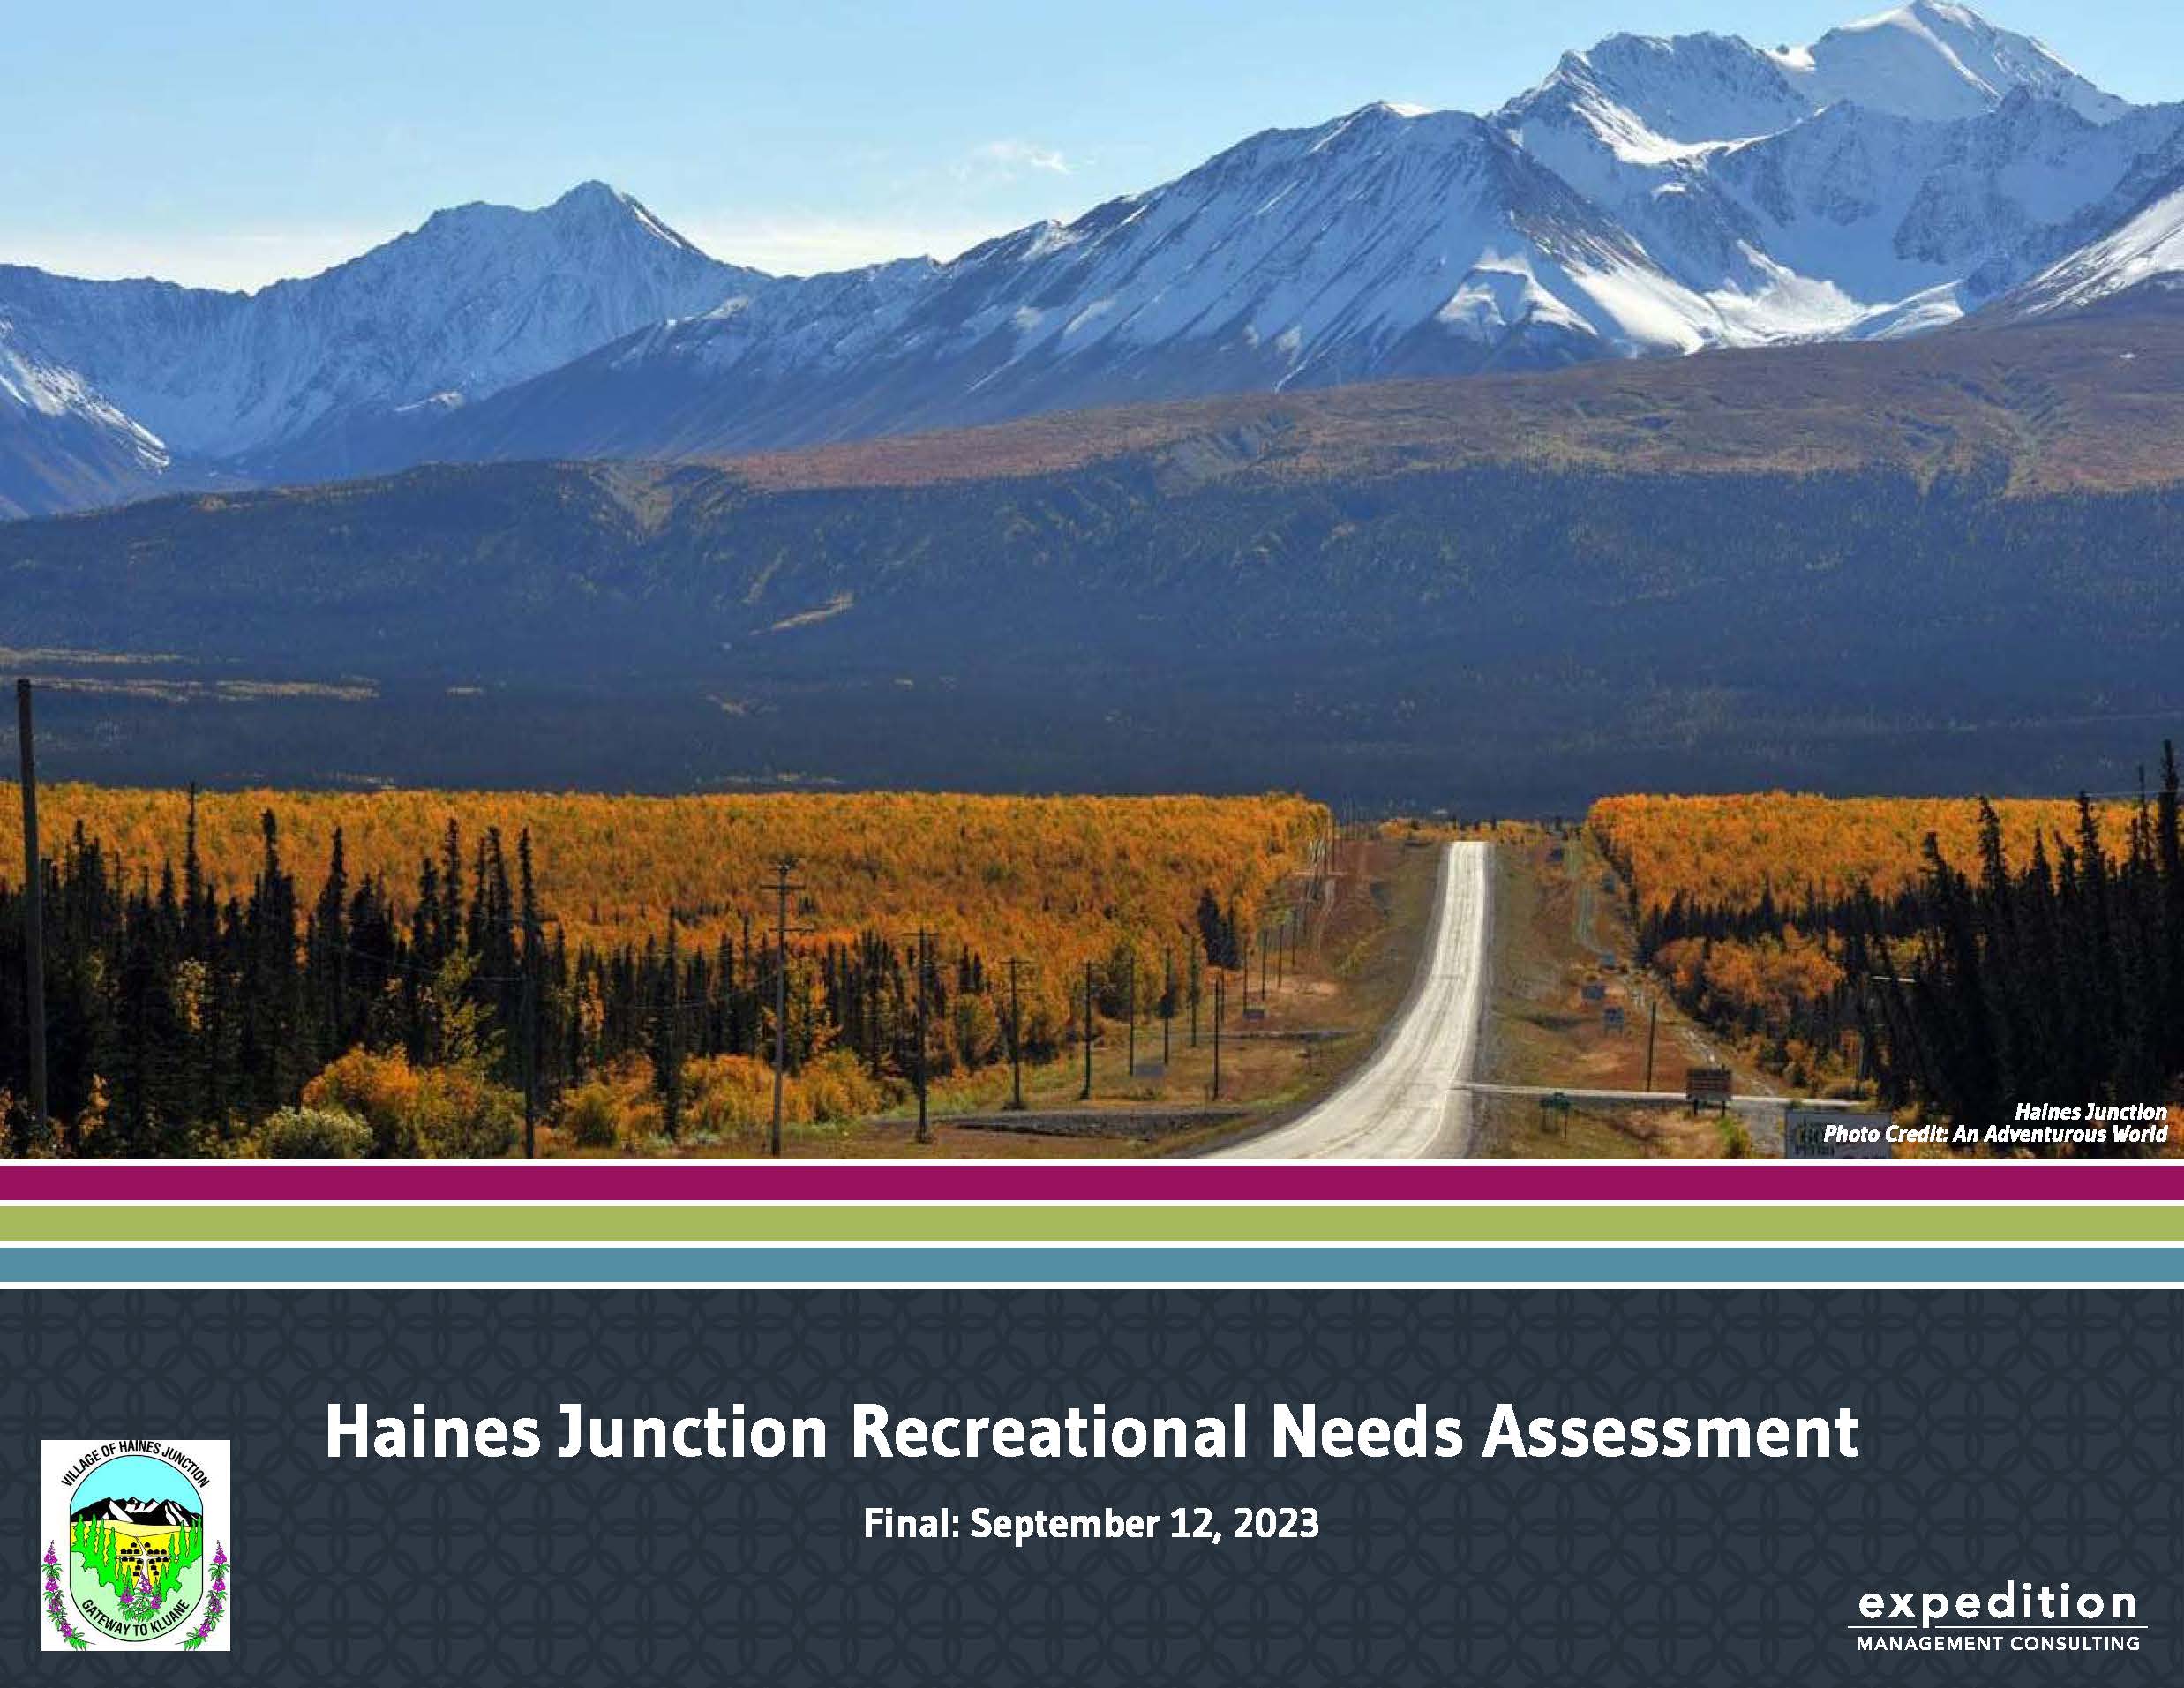 The Haines Junction Recreational Needs Assessment, completed in 2023, establishes a vision for recreation in Haines Junction. View the full report here.